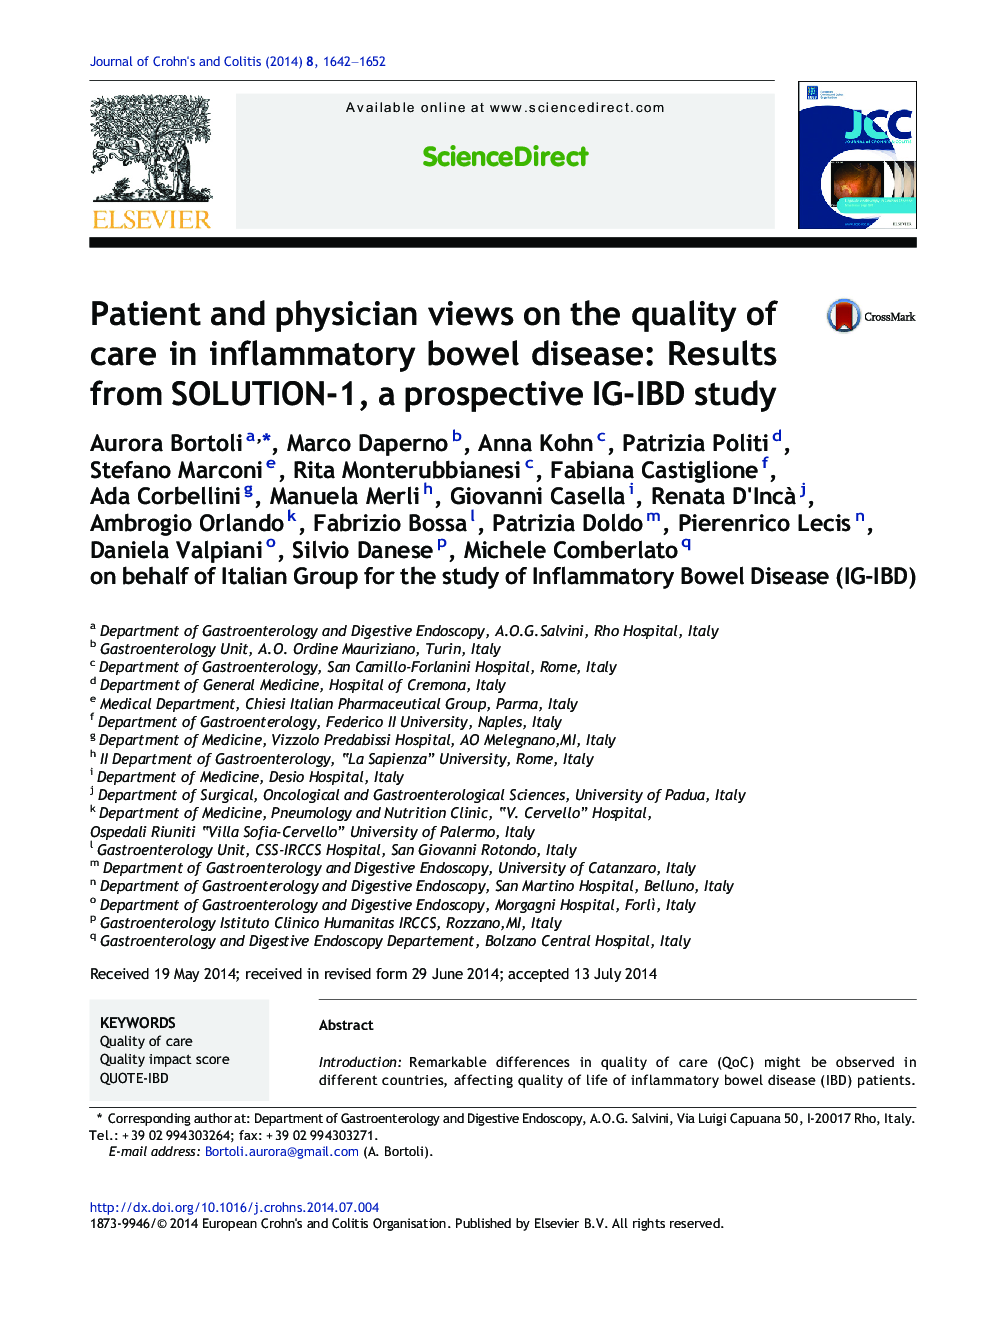 Patient and physician views on the quality of care in inflammatory bowel disease: Results from SOLUTION-1, a prospective IG-IBD study